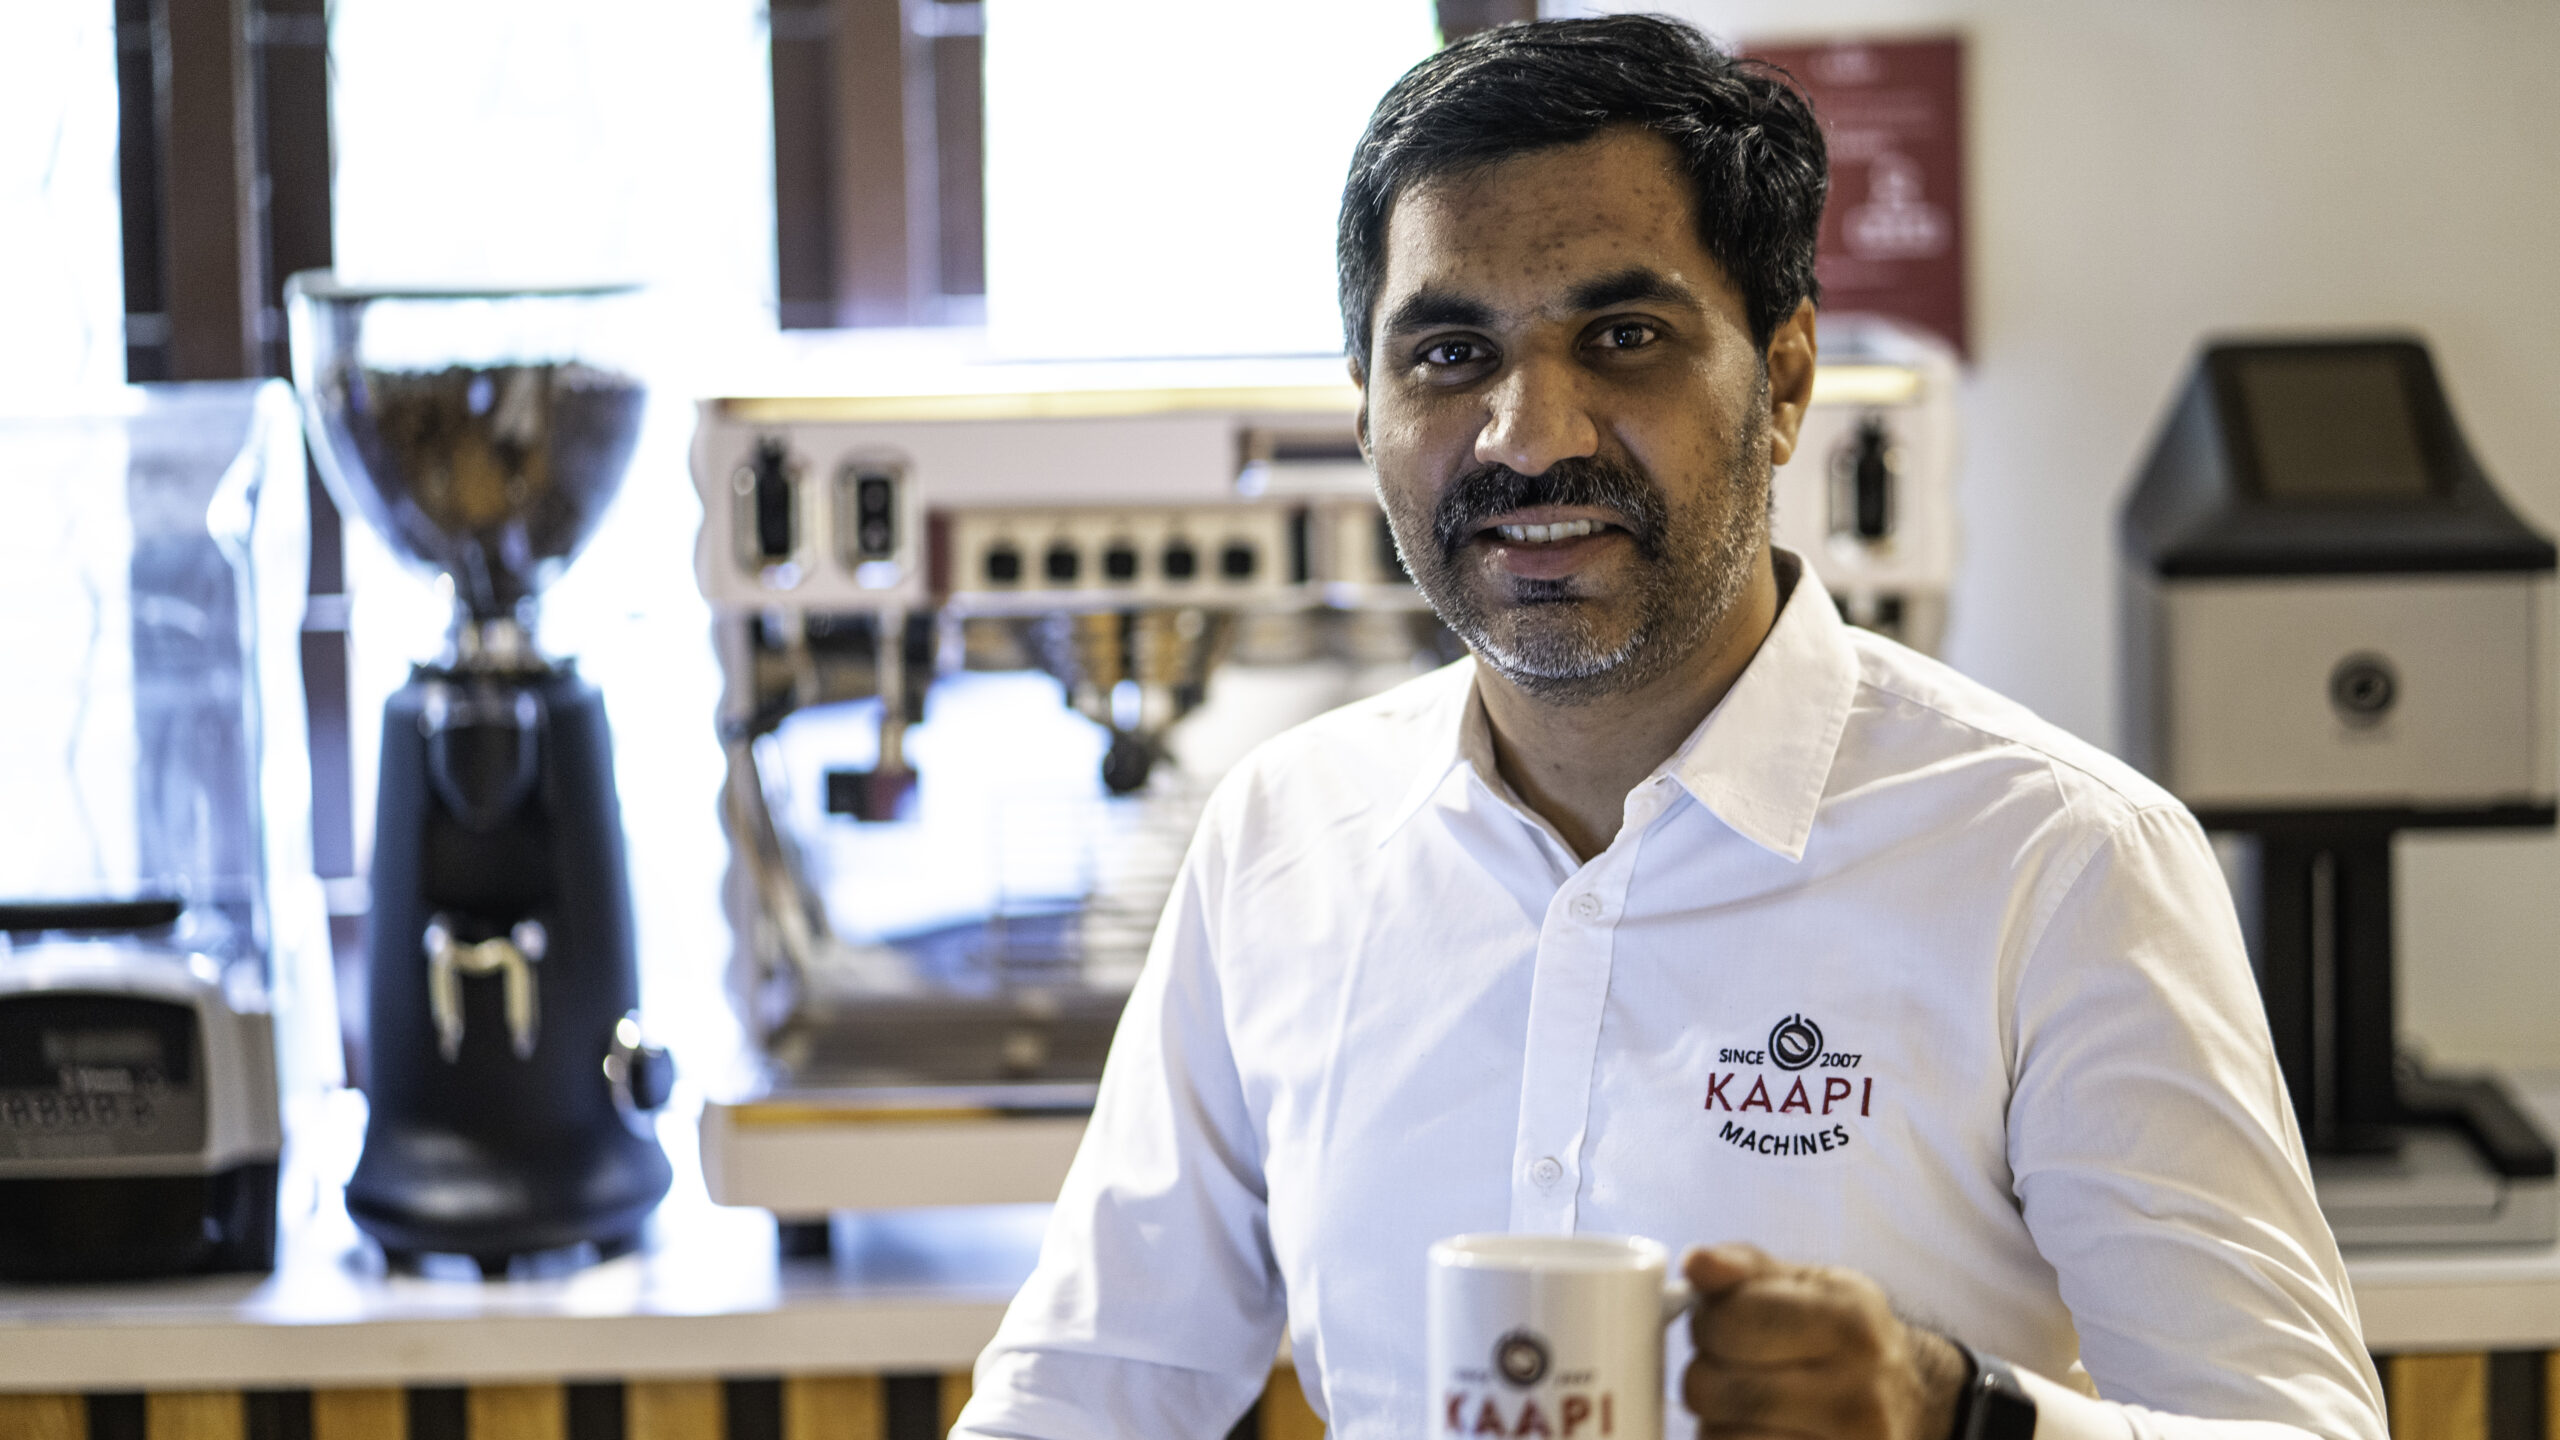 ‘Coffee is facing challenges like never before, from farm to cup’ : Abhinav Mathur, Managing Director, Kaapi Machines